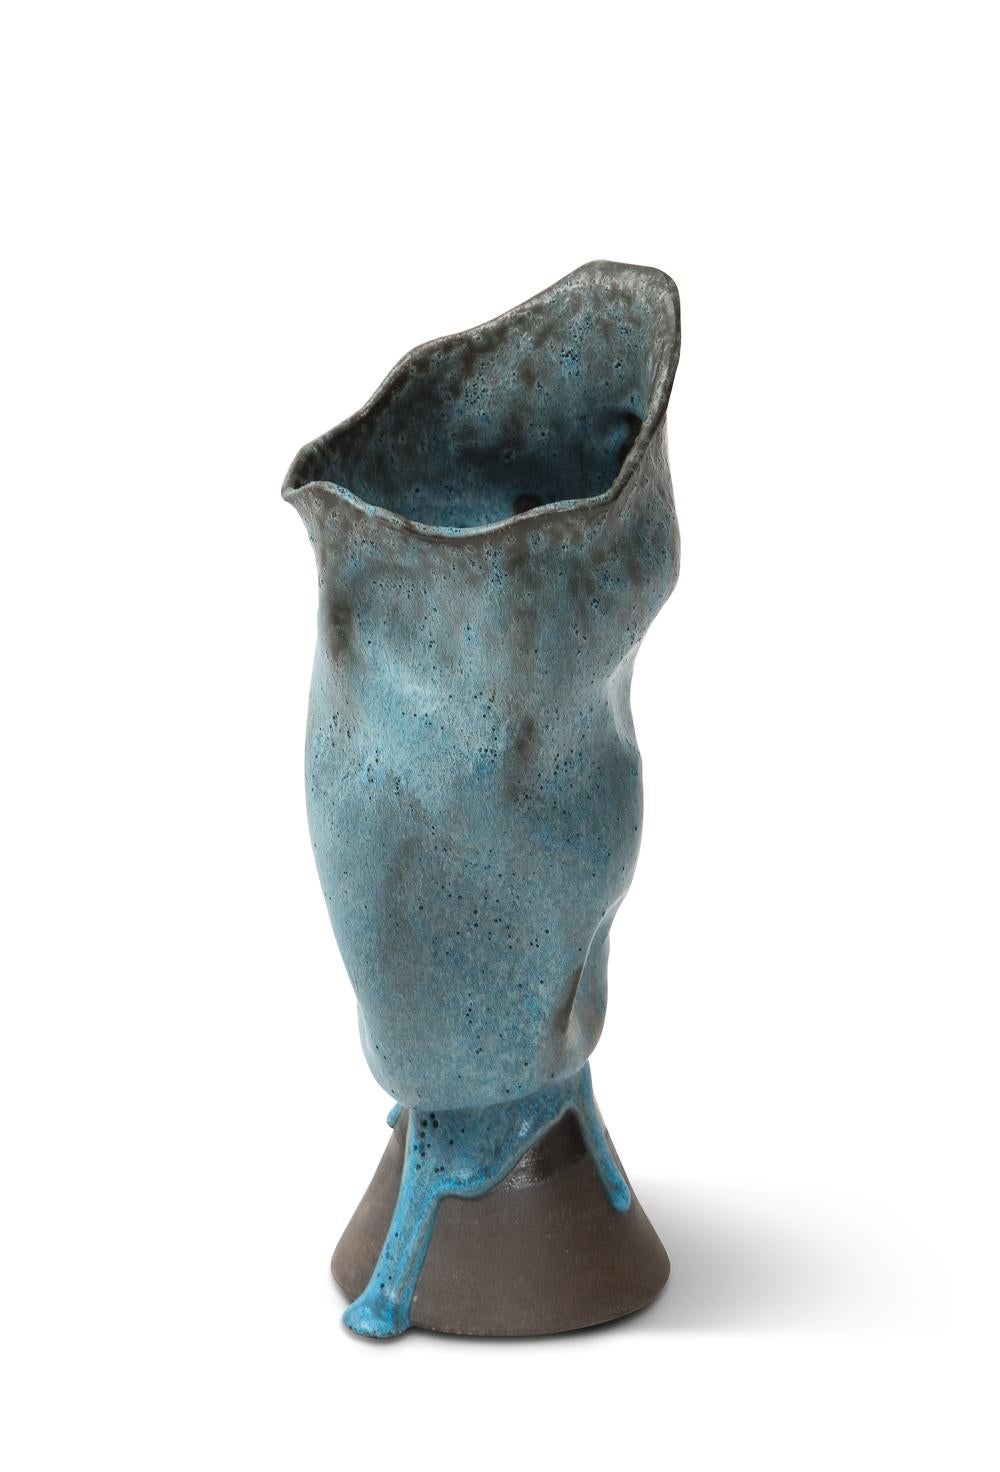 Vase with cone foot by David Haskell. Ceramic vase with blue glazes. Artist signed on underside.